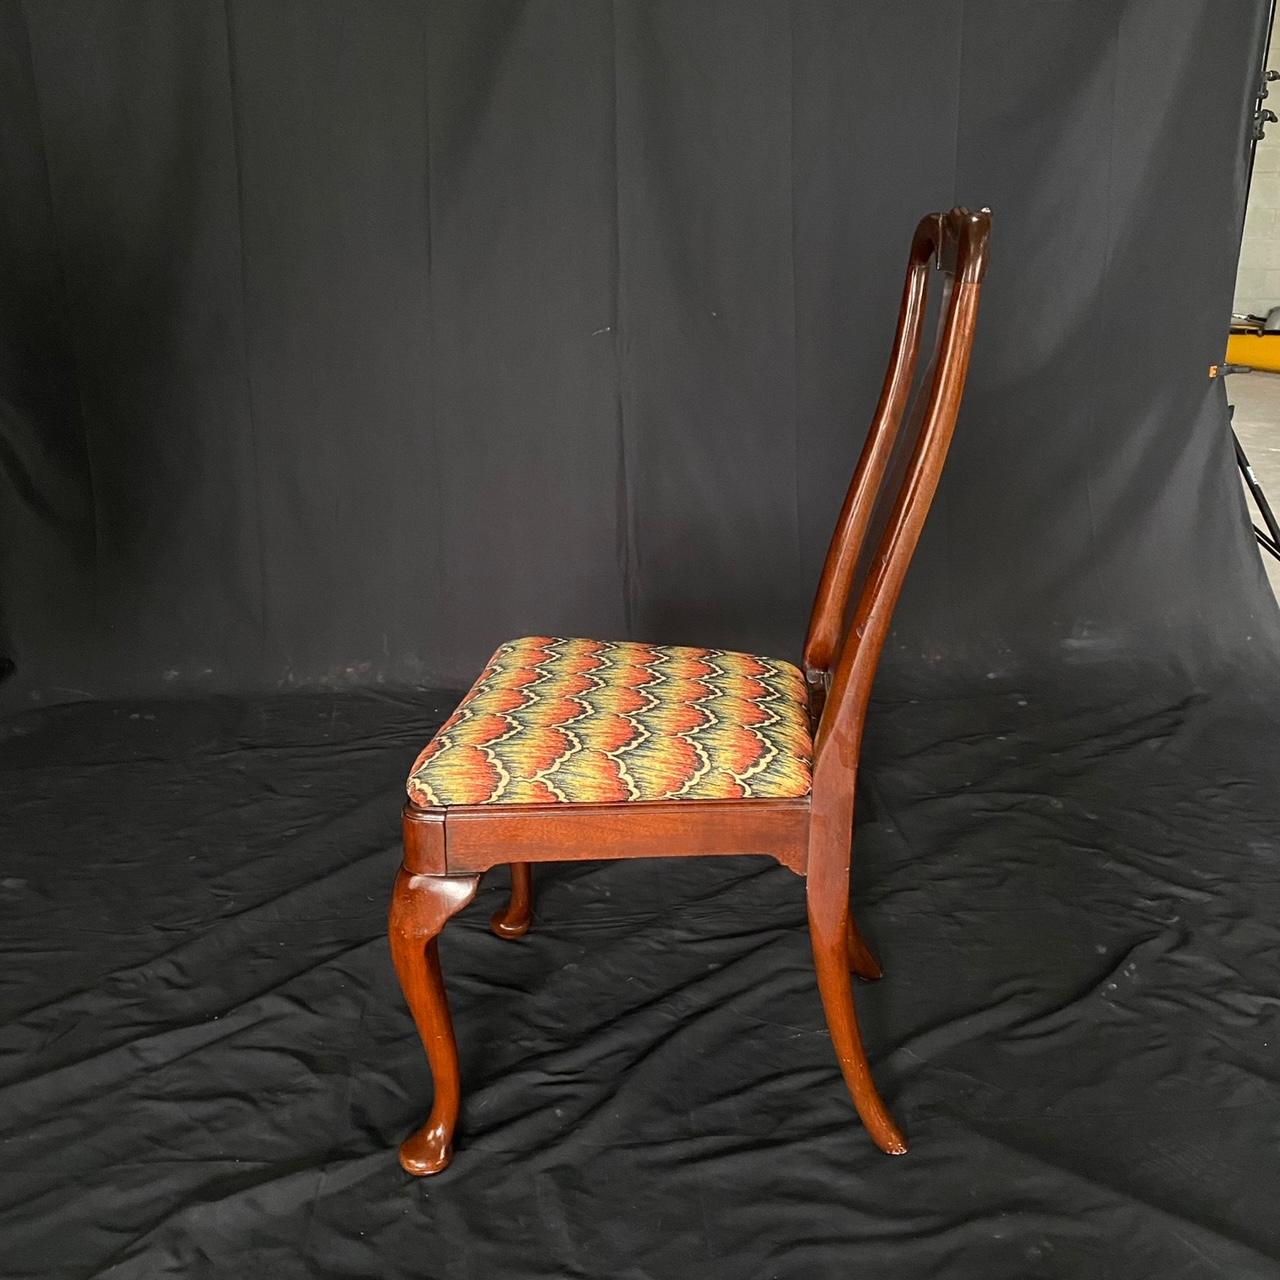 Set of 4 antique Queen Anne mahogany dining chairs having ergonomically curved seatbacks with solid splats connecting to a generously sized seat with lovely immaculate mid century upholstery. A framework surrounds the seat creating a simple apron,